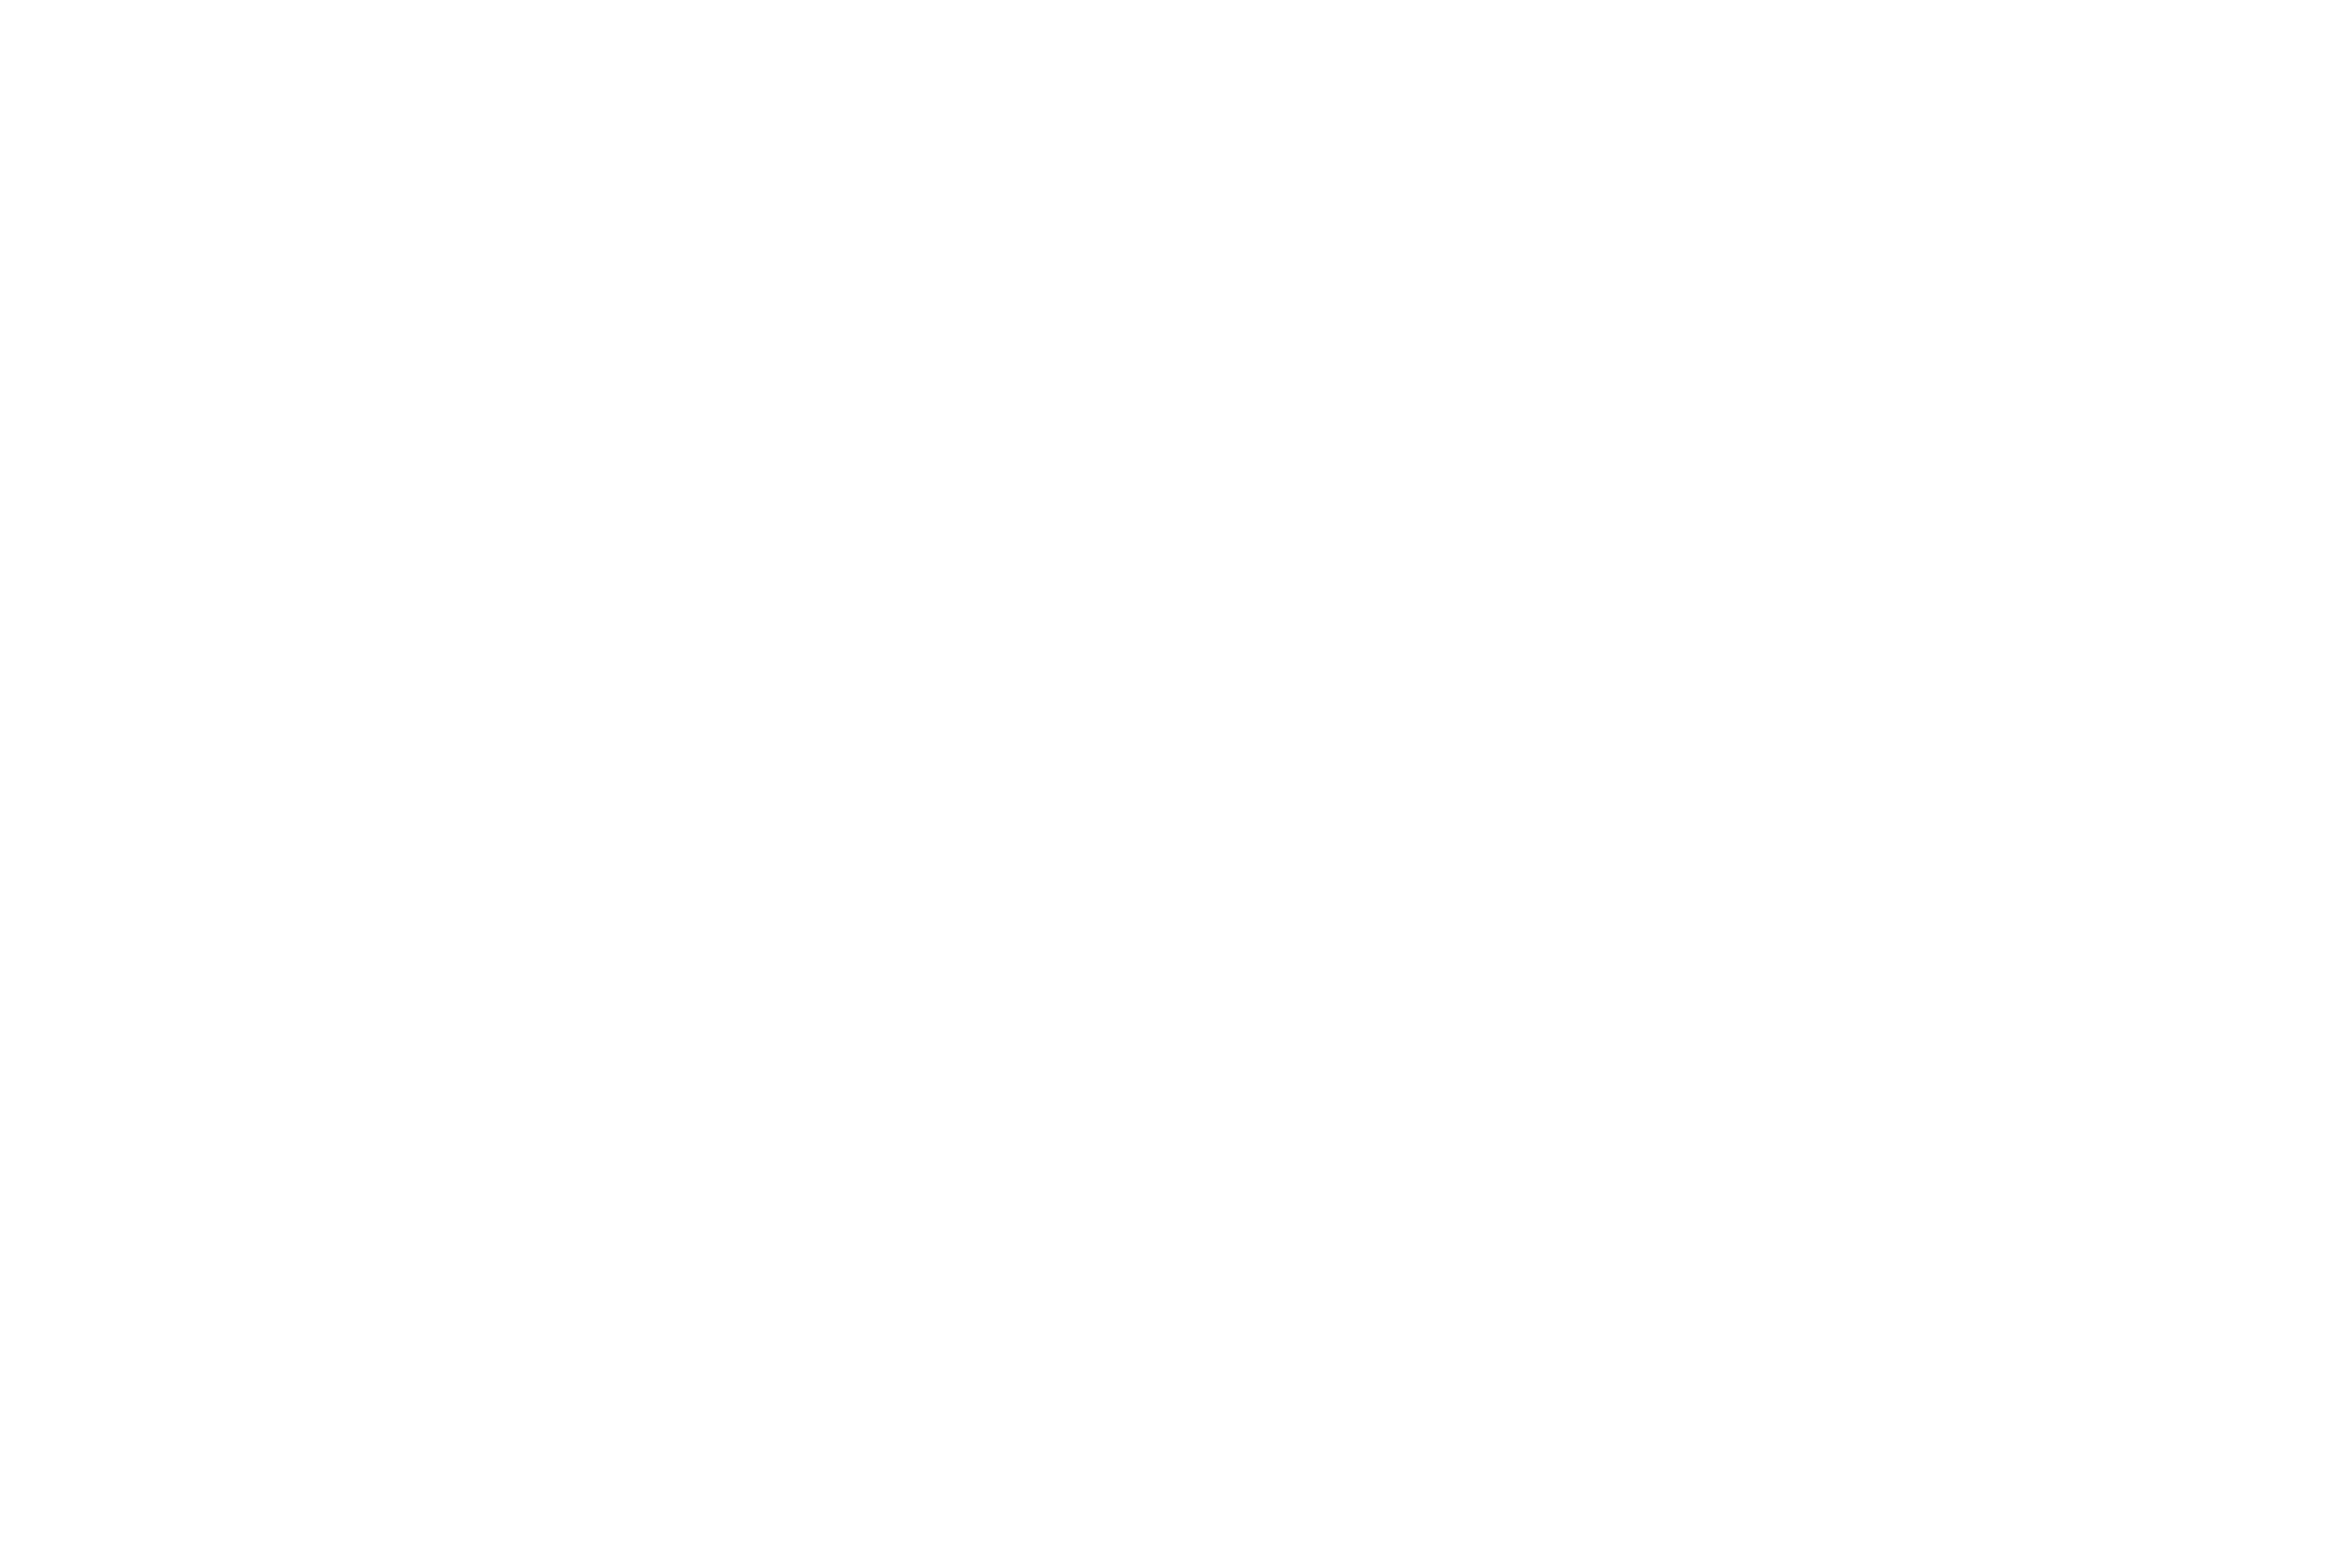 Loyalty Ends Here logo in white